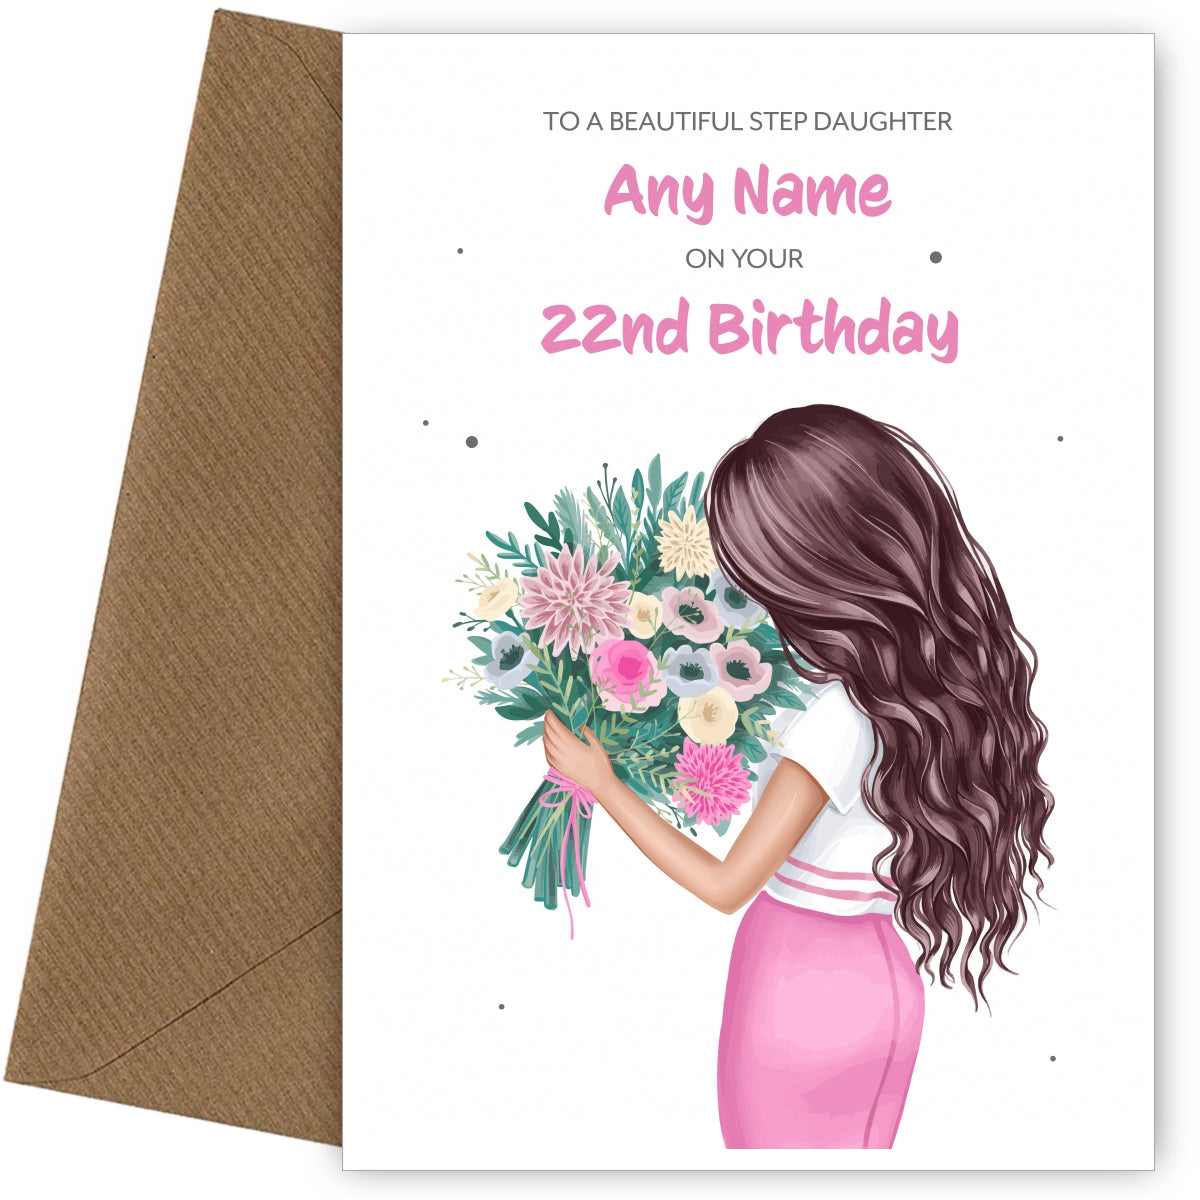 22nd Birthday Card for Step Daughter - Beautiful Brunette